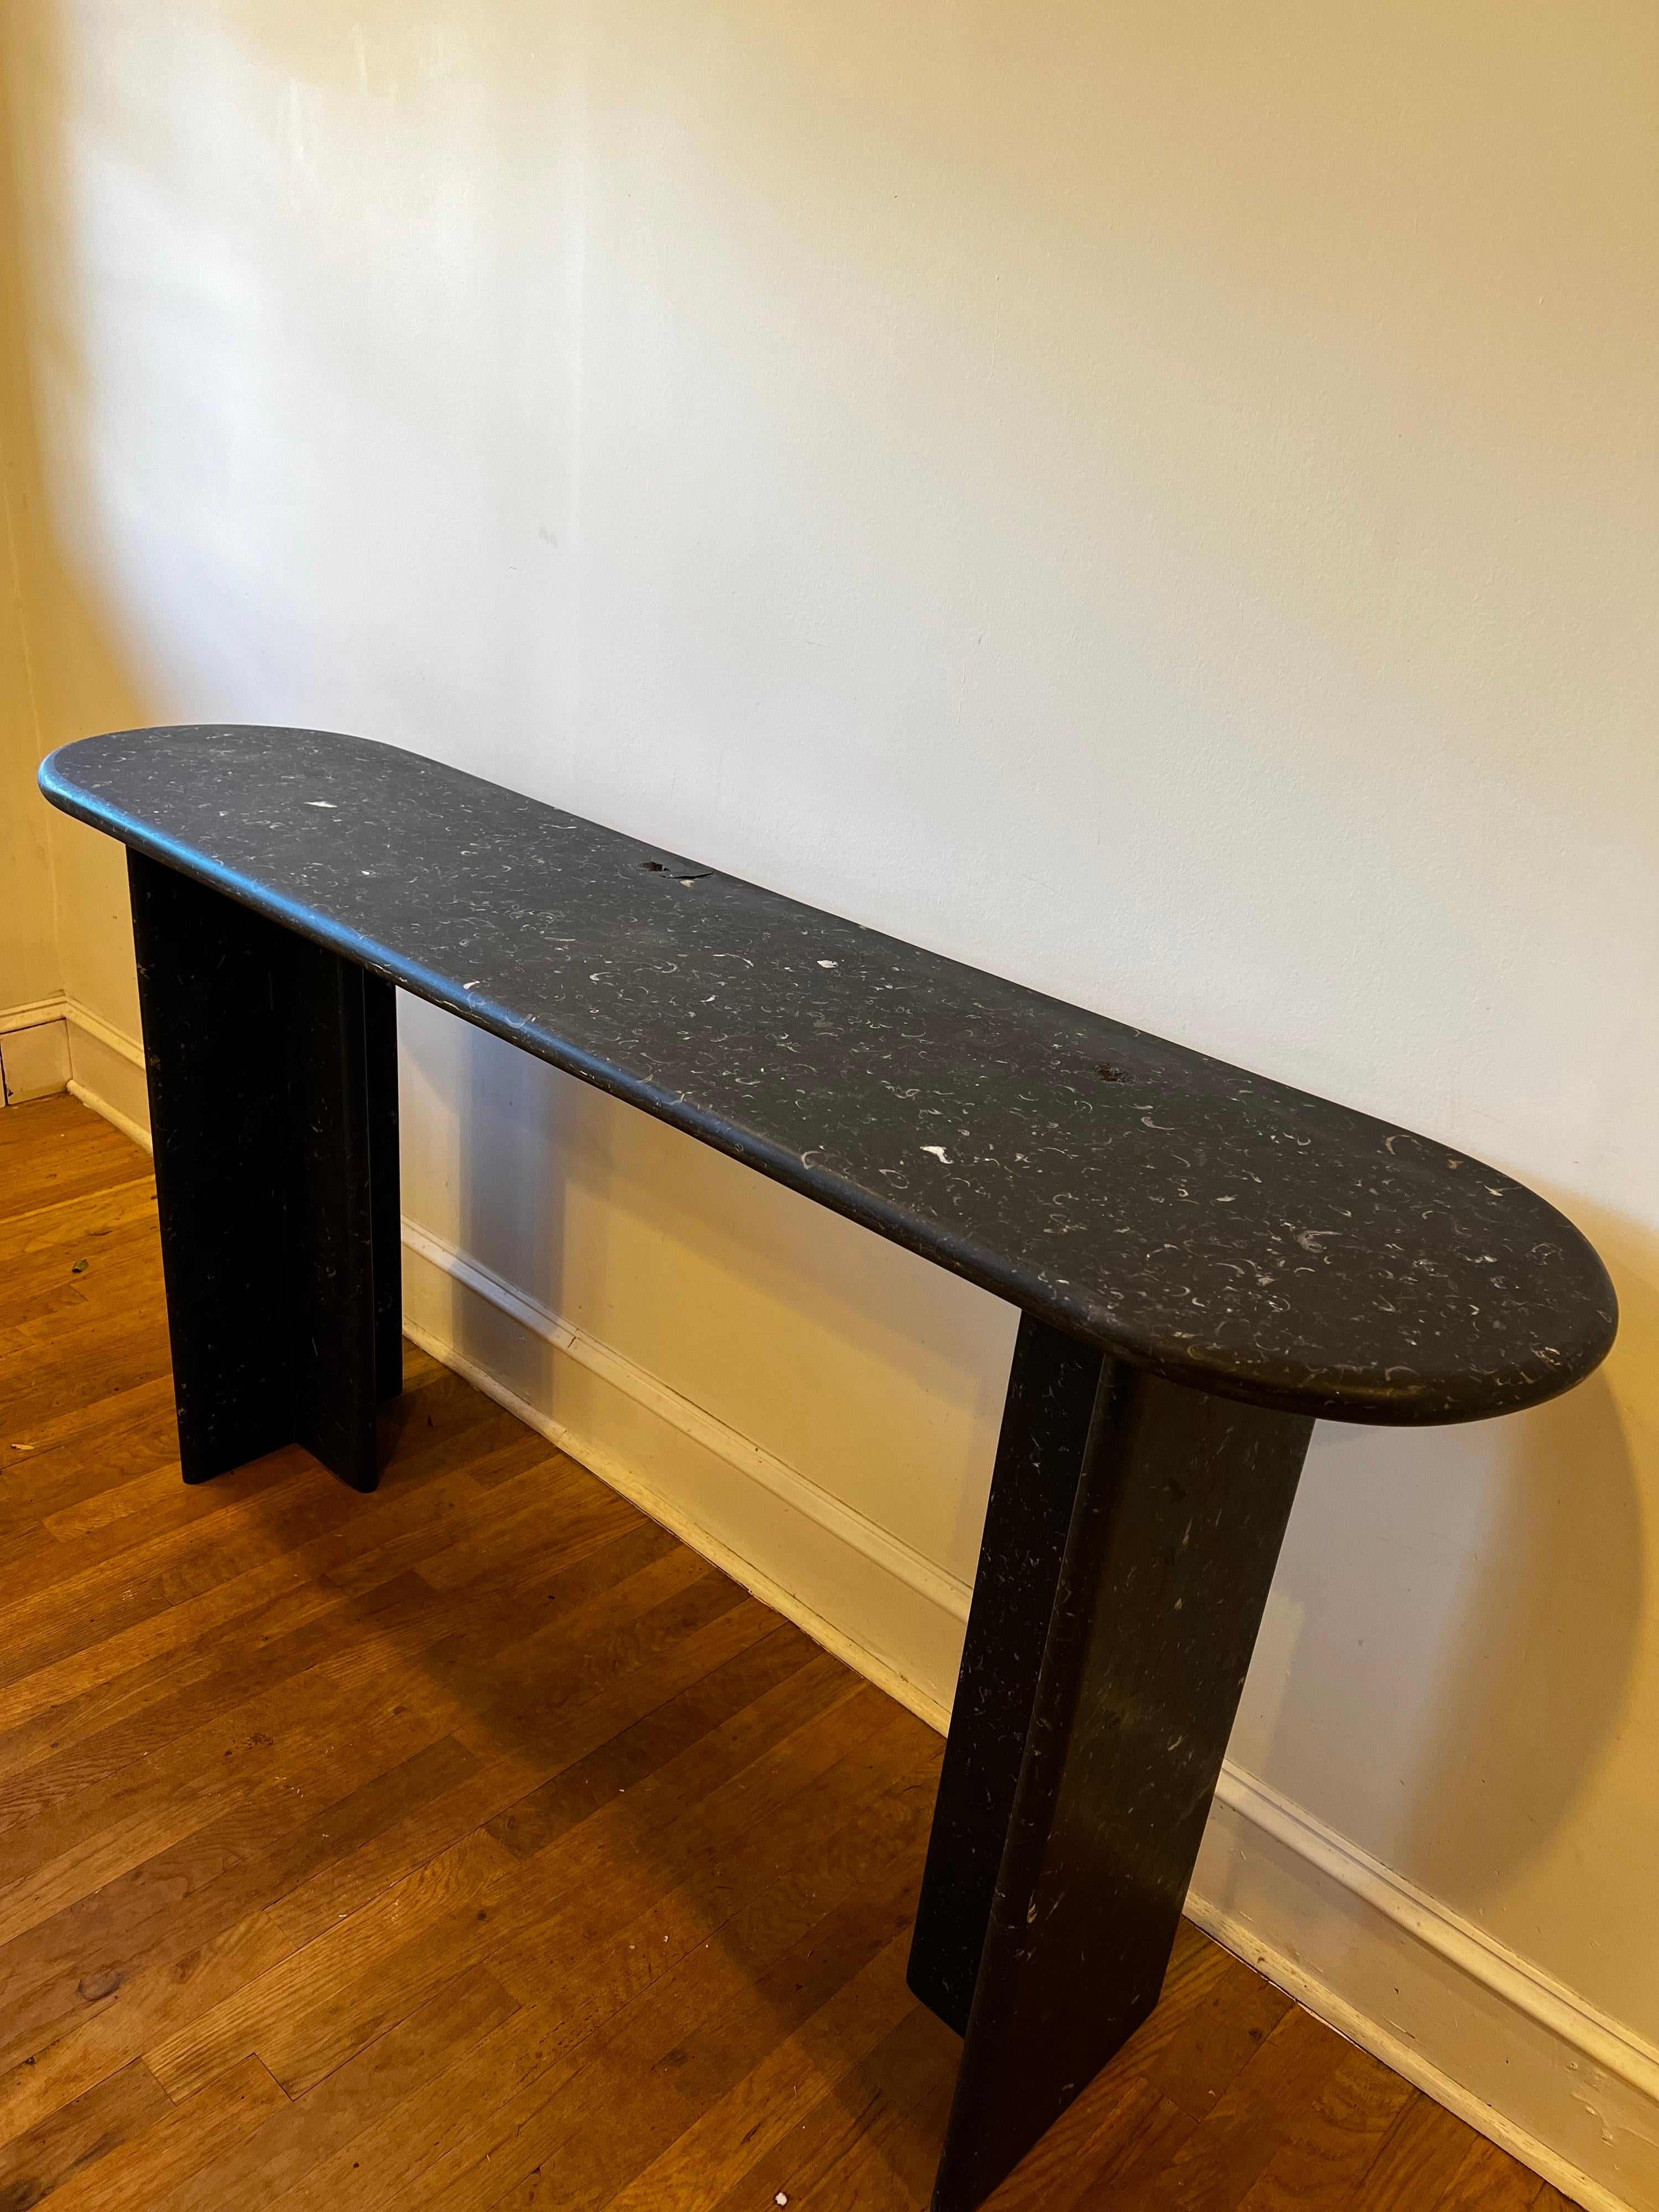 Vintage Mid Century Modern/Art Deco Black Marble Console Table. 
Three pieces include two legs and top. 

Top has curved edges as well as each leg giving it a modern/contemporary style.
Imported from Colombia. 

Matching end table available.